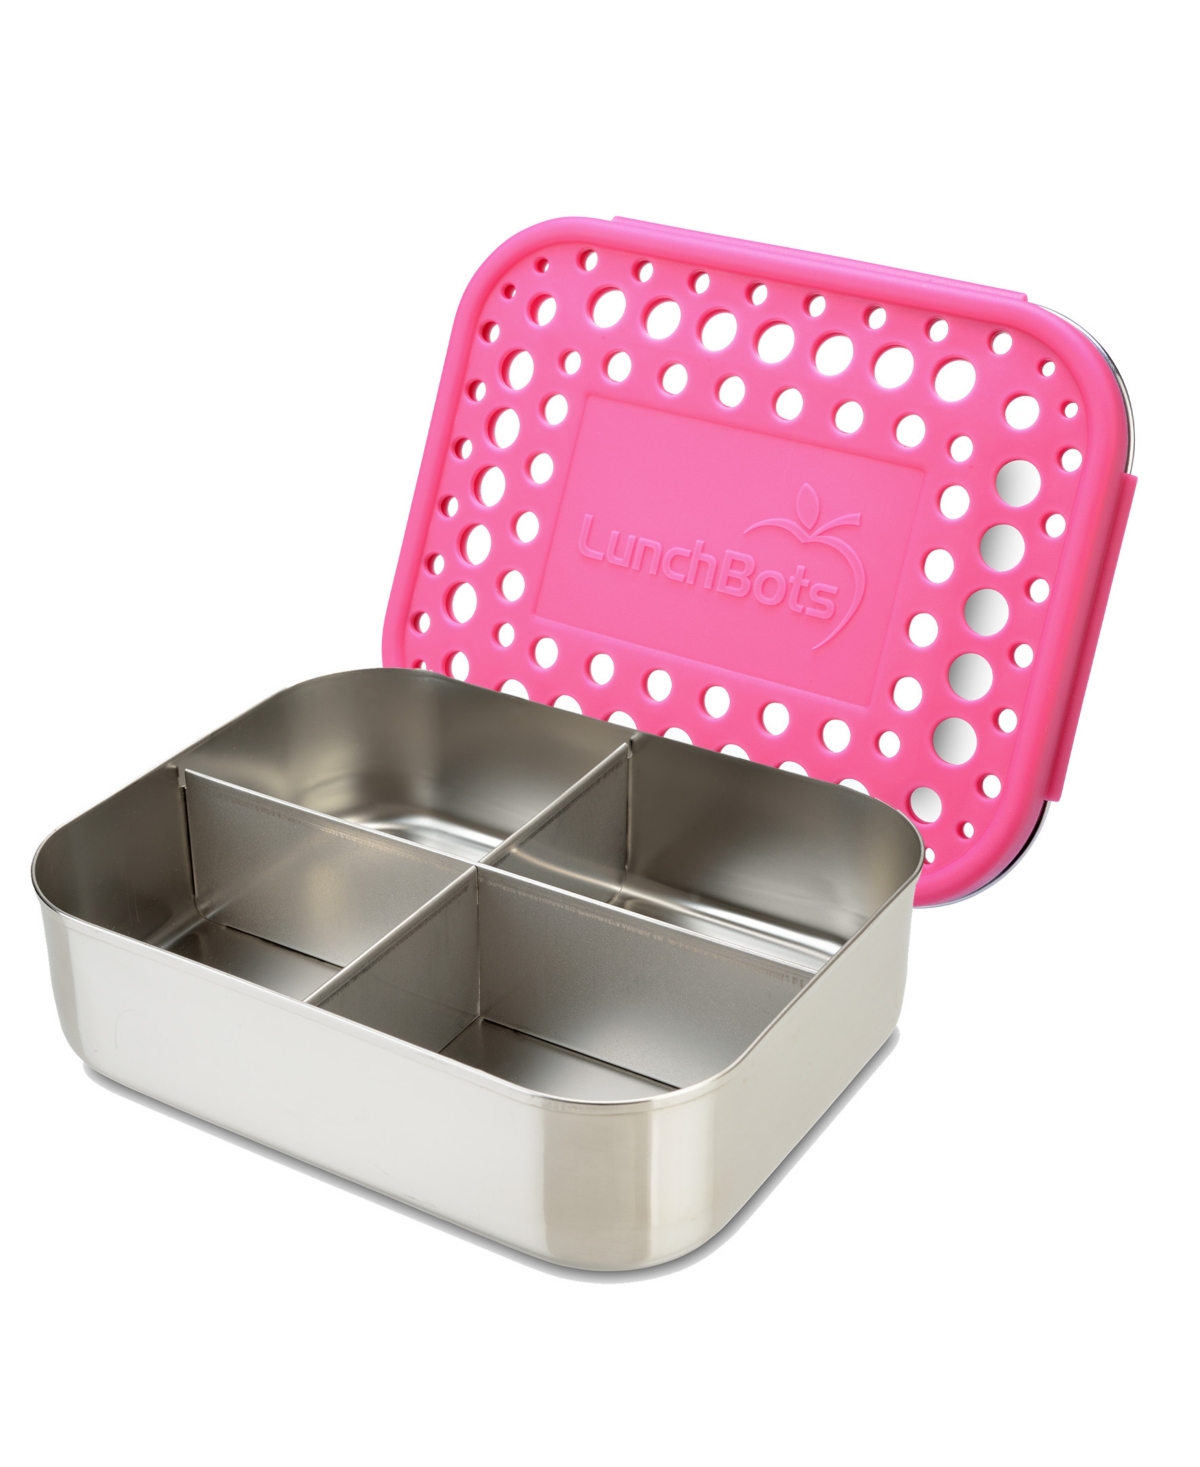 Lunchbots Stainless Steel Bento Lunch Box 4 Sections In Pink Dots